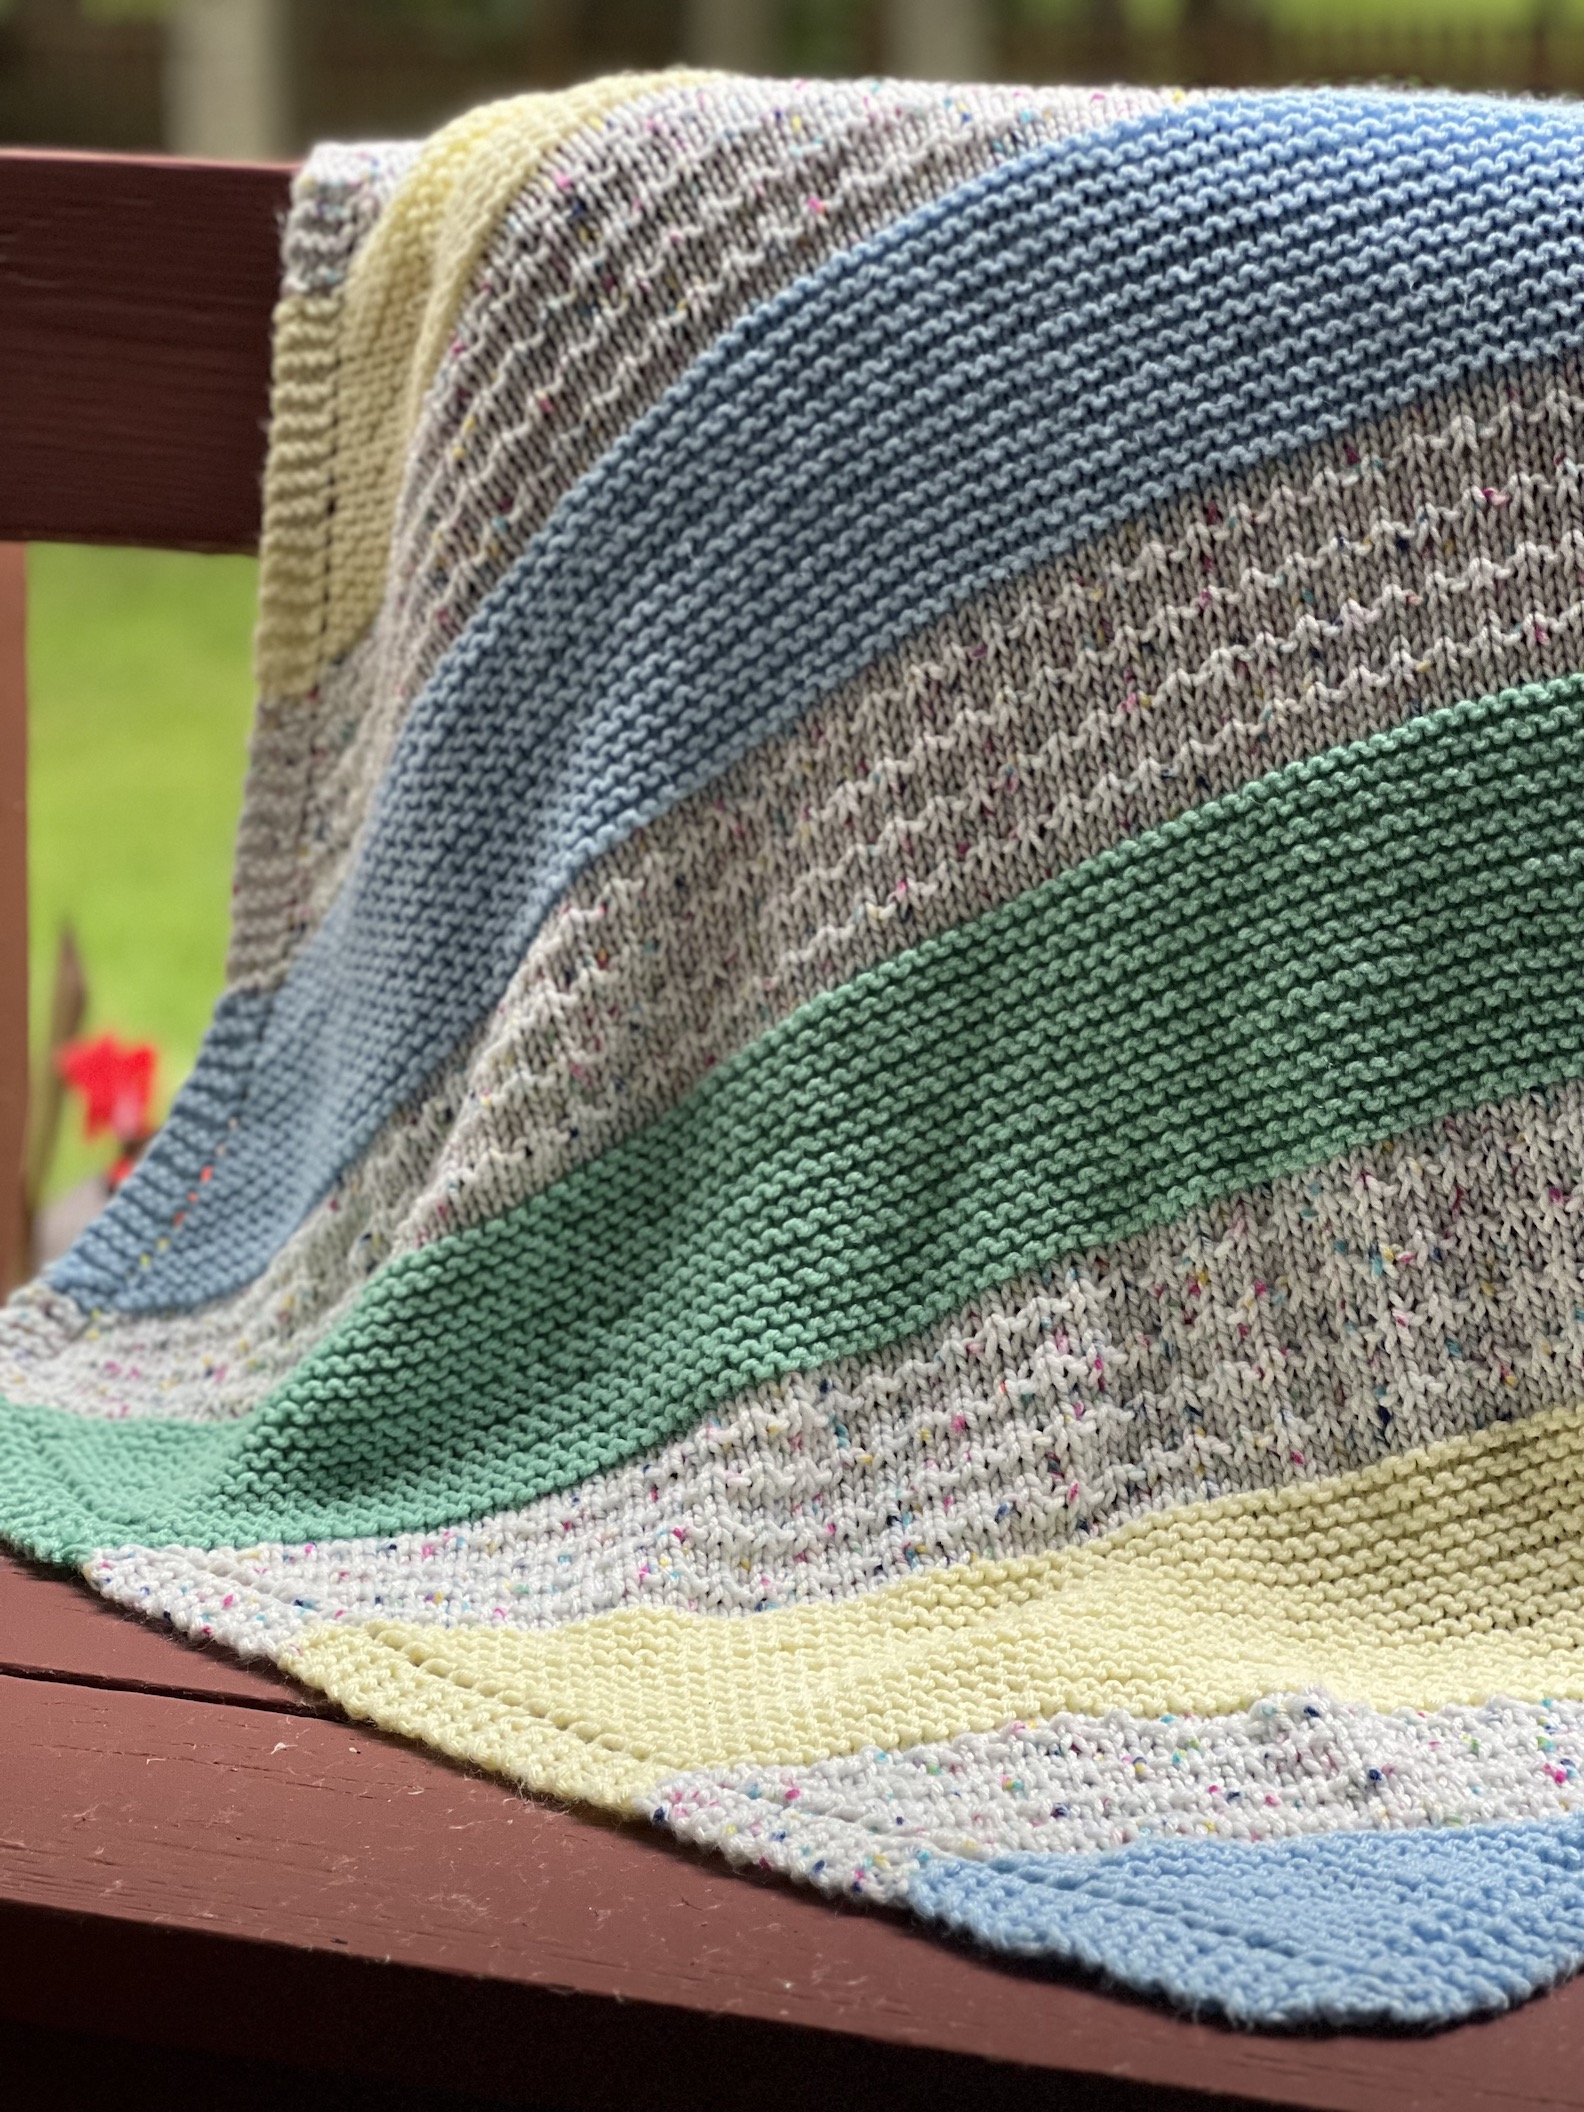 striped baby blanket on bench